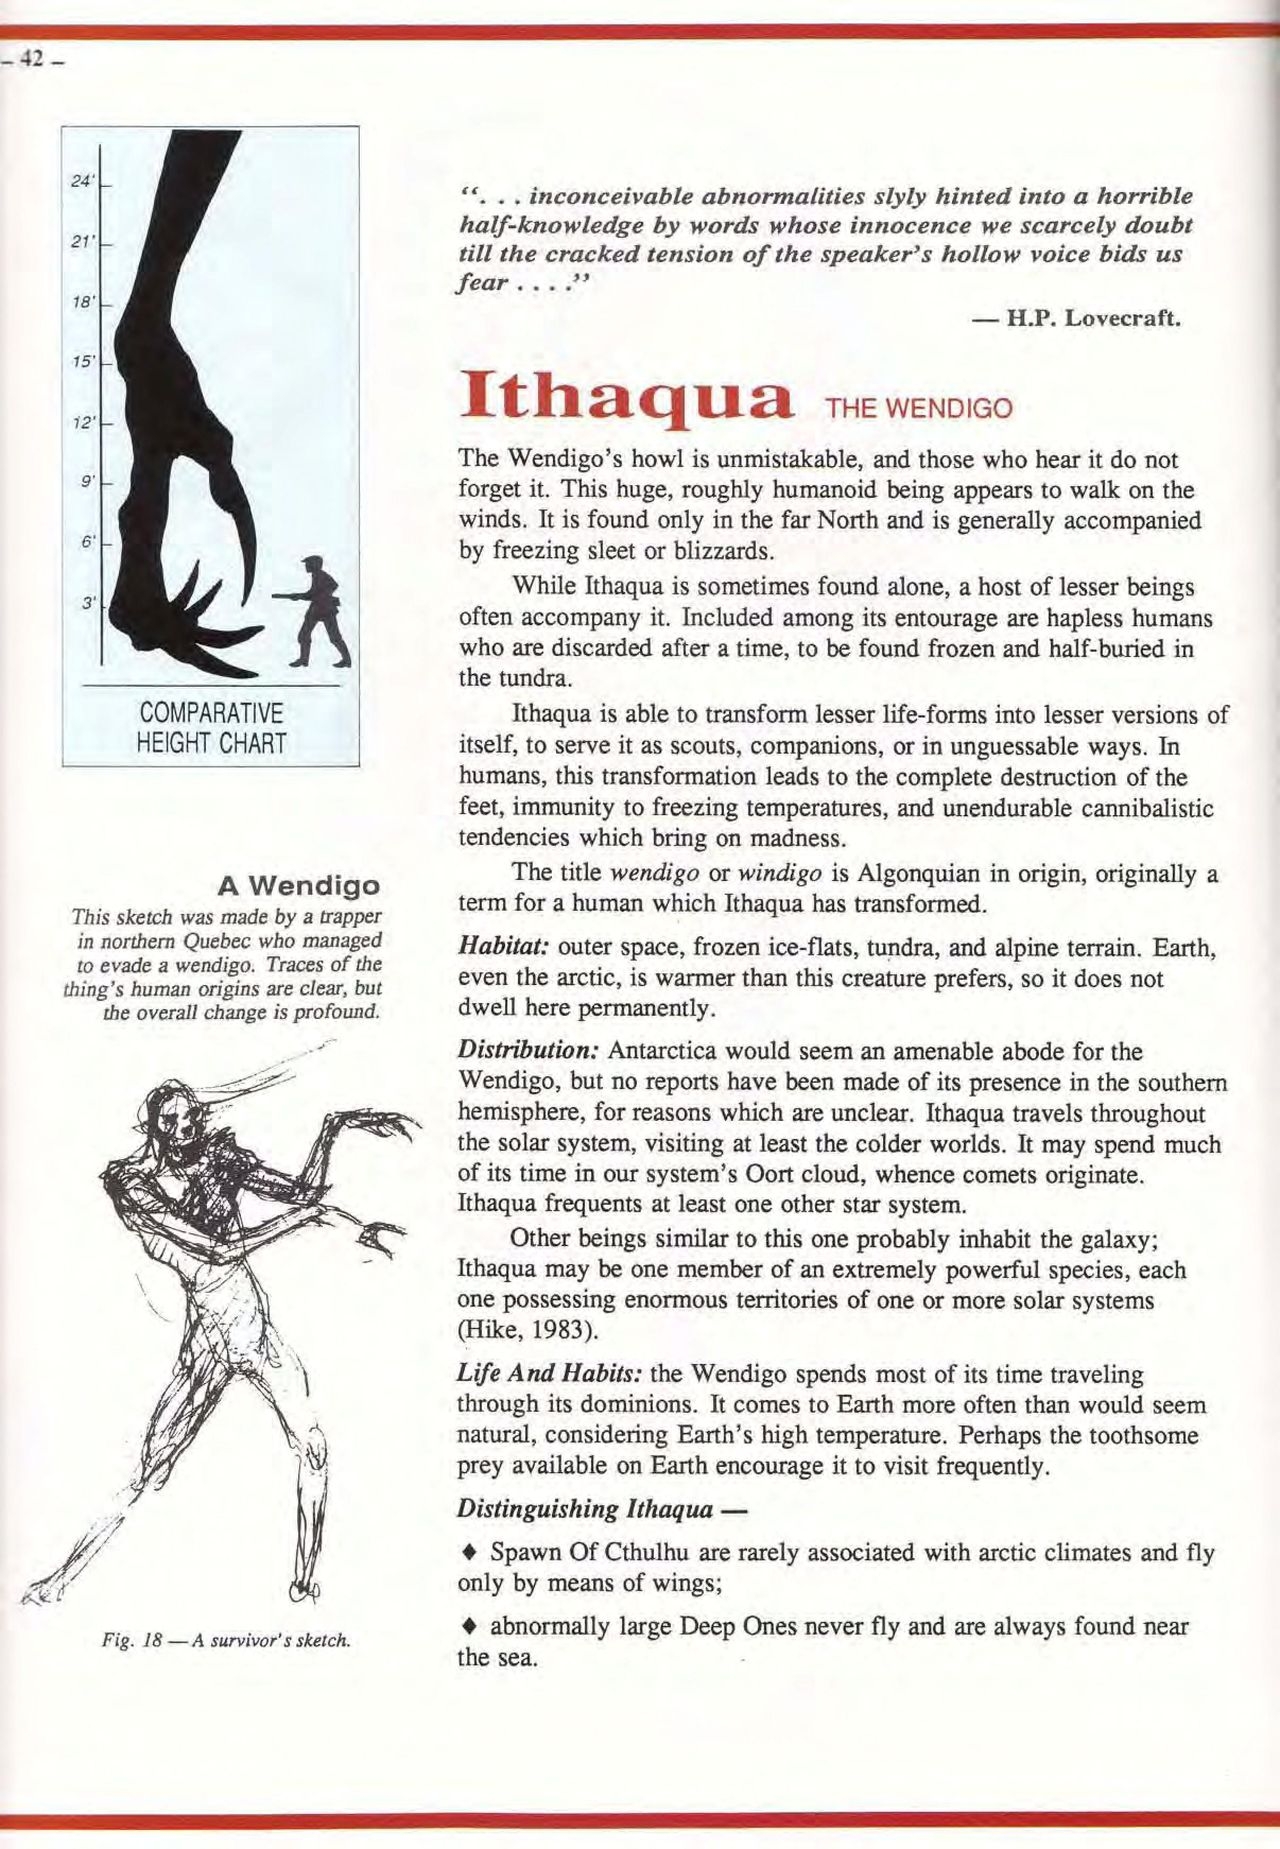 S. Petersen's Field Guide to Cthulhu Monsters 41